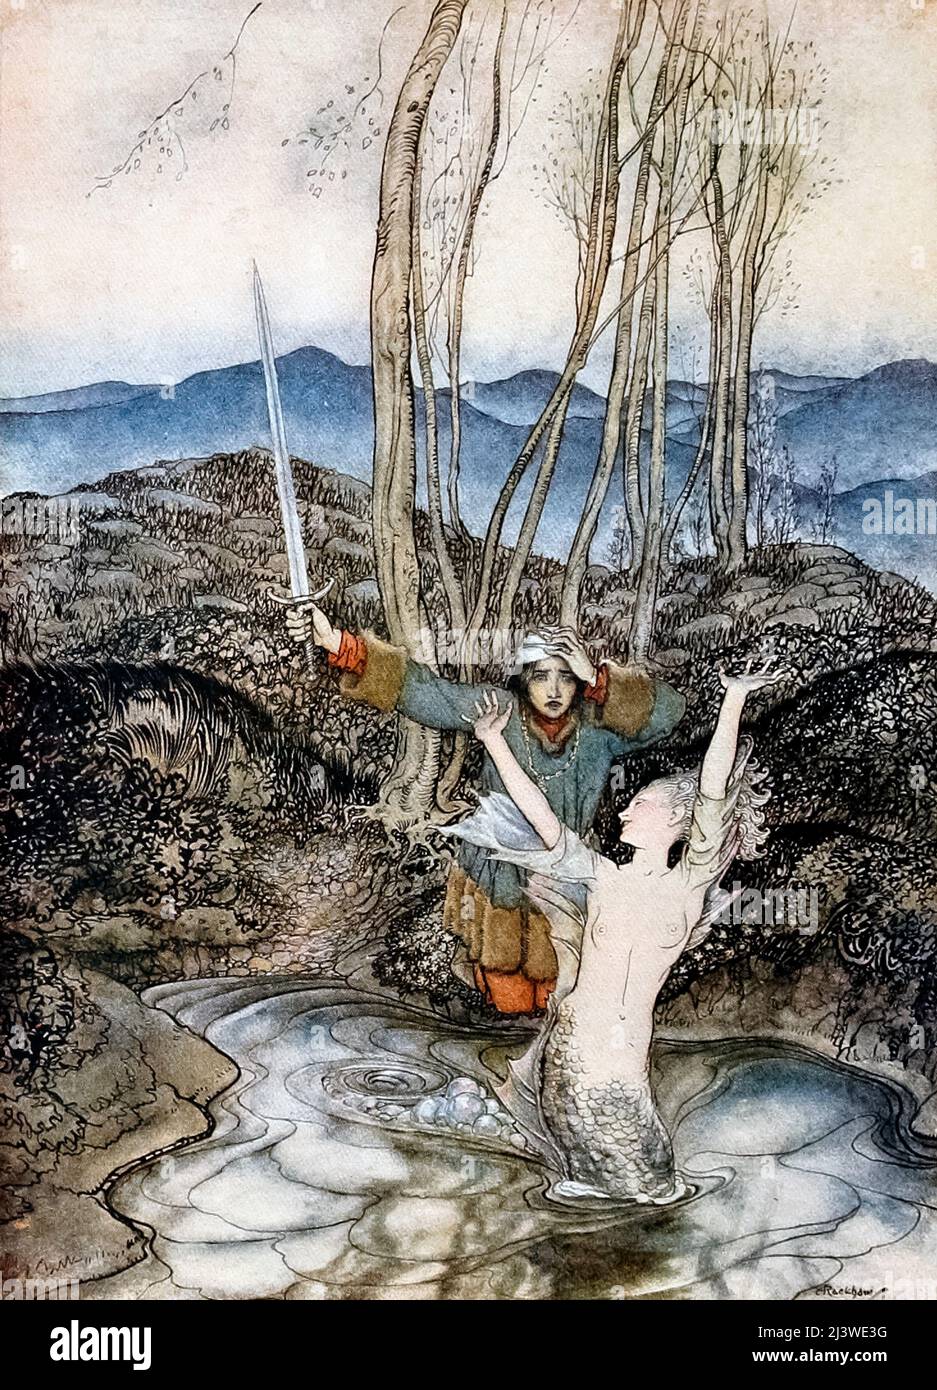 From the Ballad ' Clerk Colvill '  that appeared in the book ' Some British ballads ' illustrated by Arthur Rackham, Publisher New York : Dodd, Mead 1919 Clerk Colvill, ignoring the advice of his lady or his mother, goes to a body of water, where a mermaid seduces him. His head starts to ache, and the mermaid tells him he will die of it. He goes home and dies. In some variants, she offers that he may go to sea with her instead of dying, at the end, and he refuses. Stock Photo